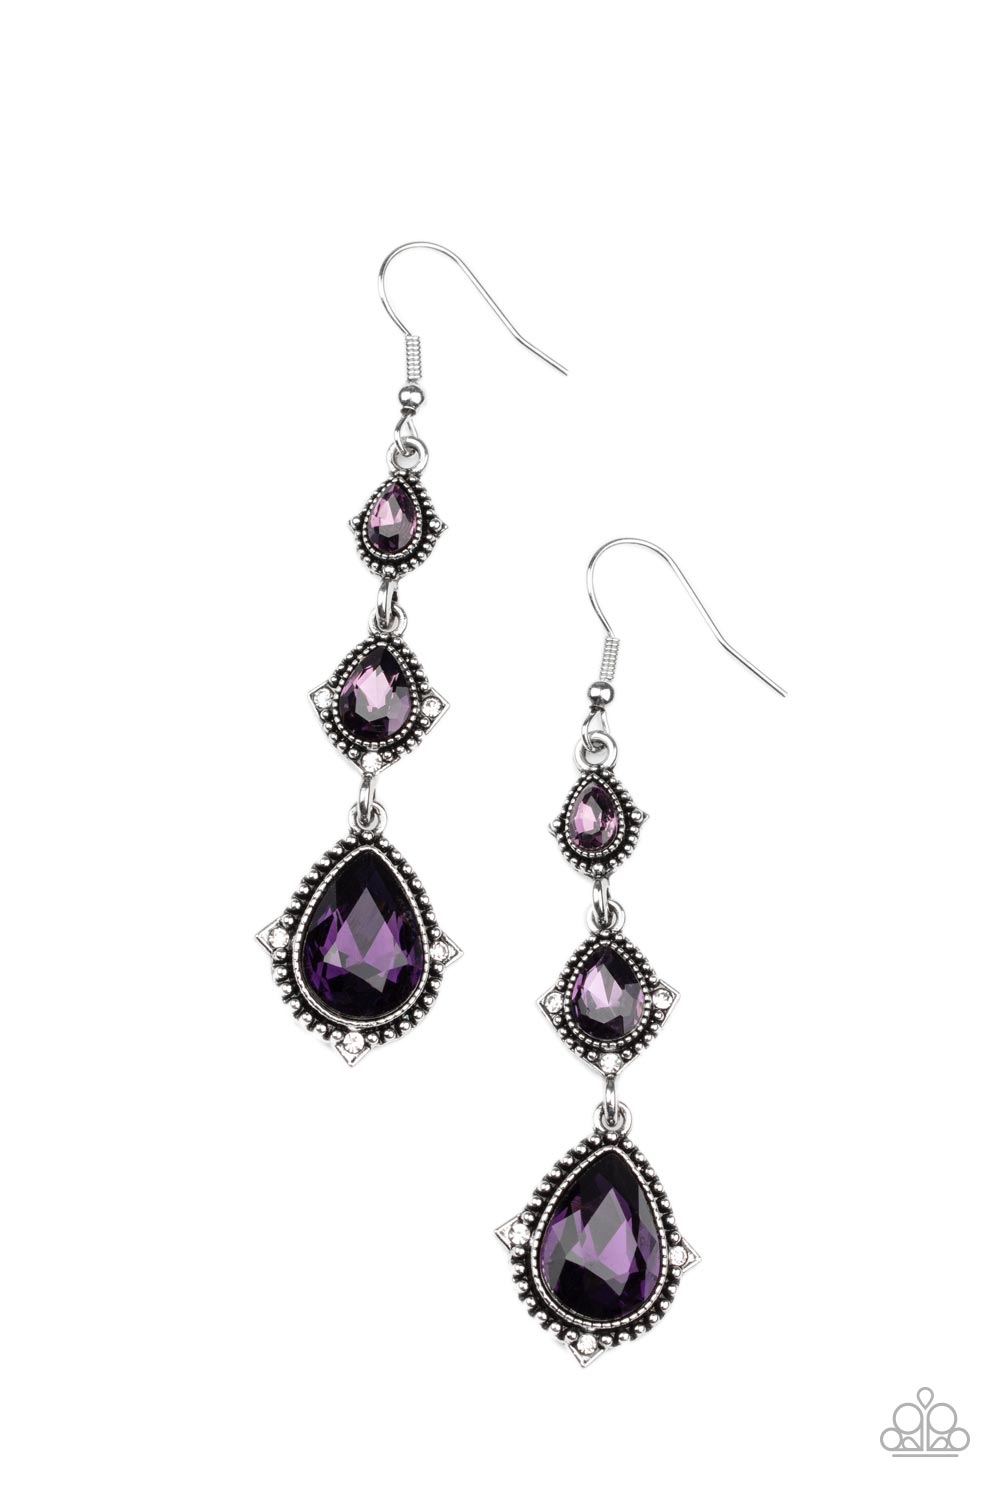 Prague Princess - Purple and Silver Earrings - Paparazzi Accessories - Featuring studded silver frames, a sparkly trio of purple teardrop gems delicately link into a romantic lure. Dainty white rhinestones embellish the edges of the lowermost teardrops, adding a hint of glassy glamour.